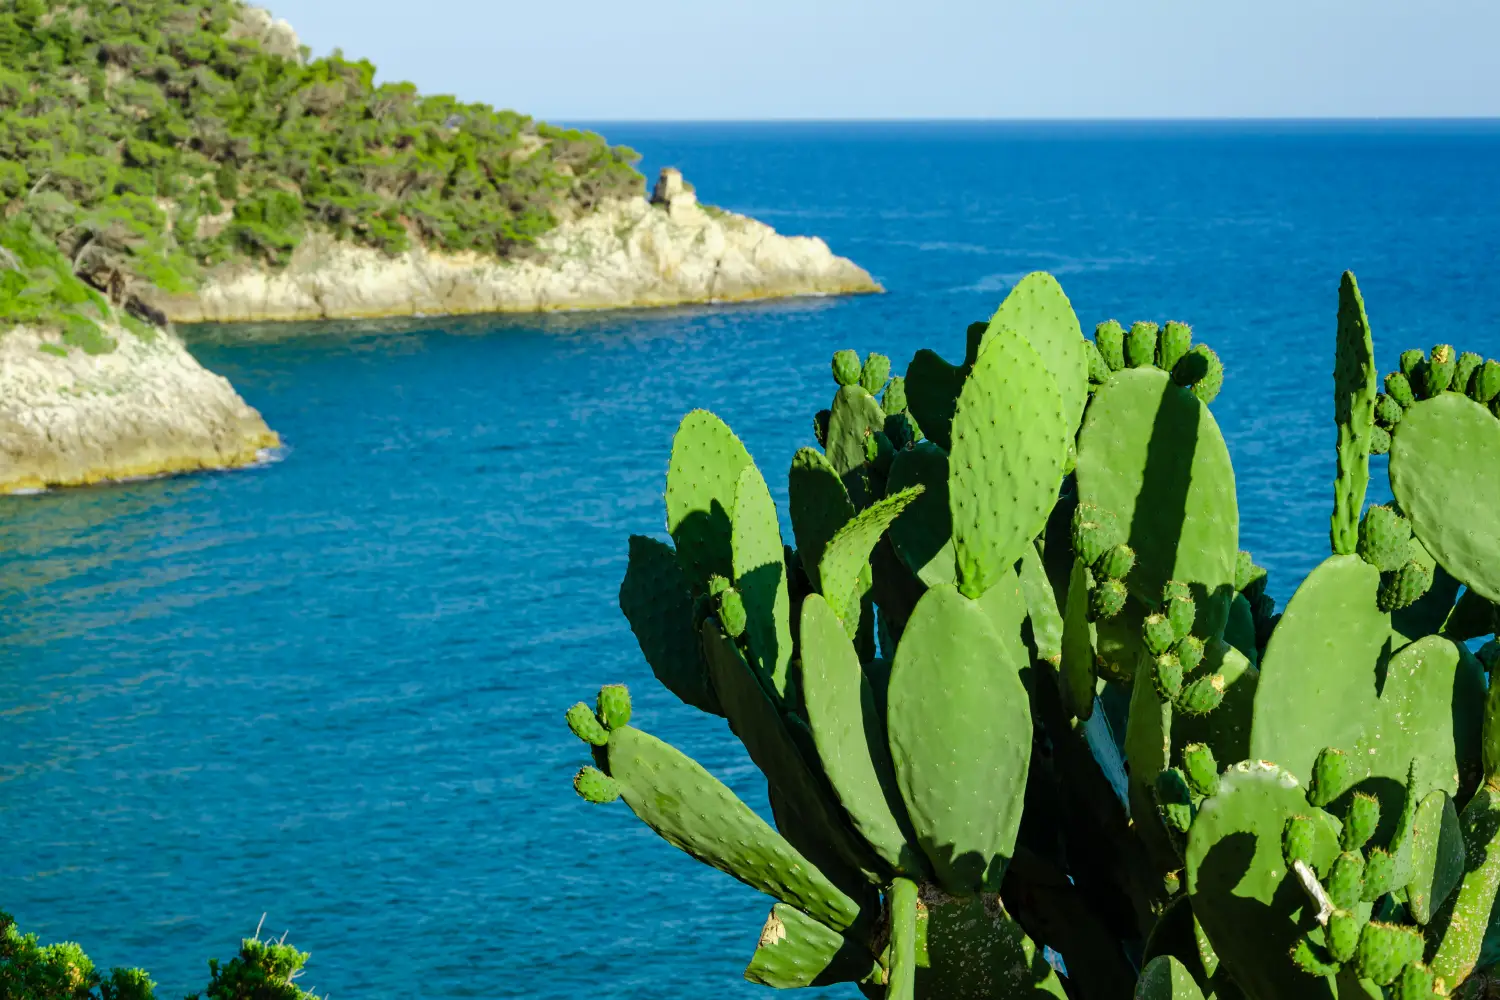 Ferry to Formia - Picturesque view with cactus on rocks and seascape background near Formia in Gaeta gulf, Italy Vacation in Europe concept.